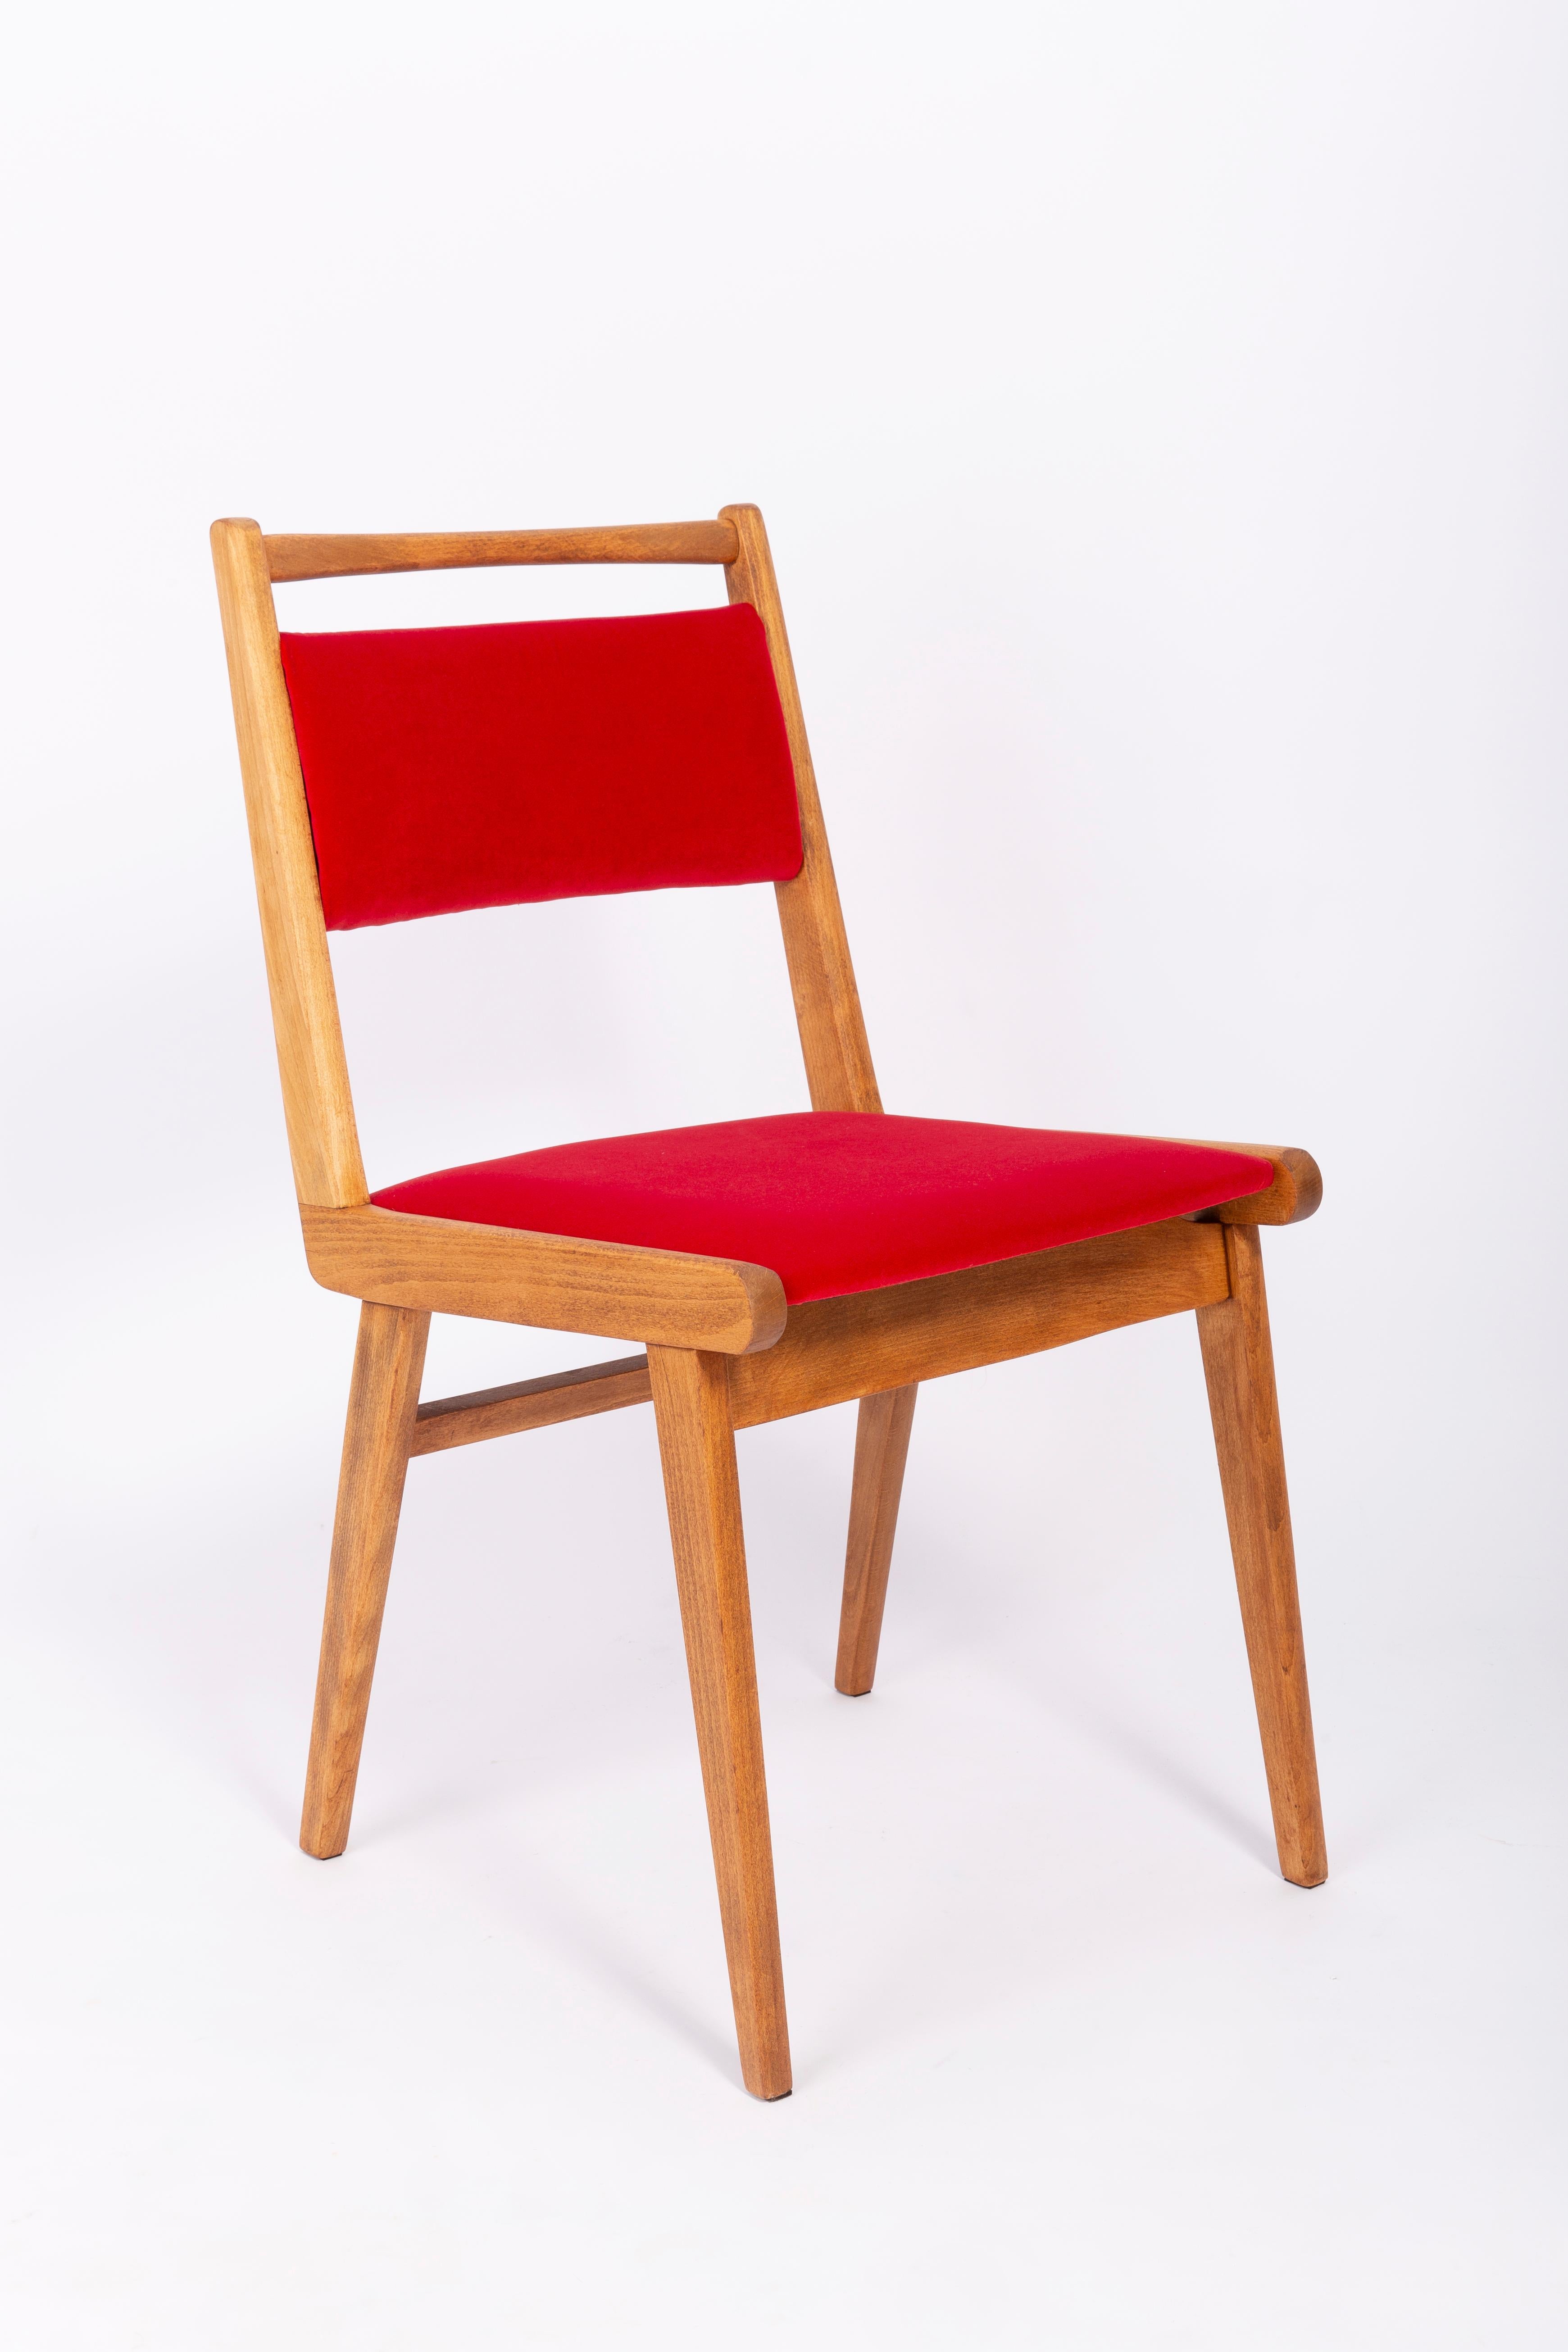 Set of Two 20th Century White and Red Velvet Chairs, Poland, 1960s For Sale 4